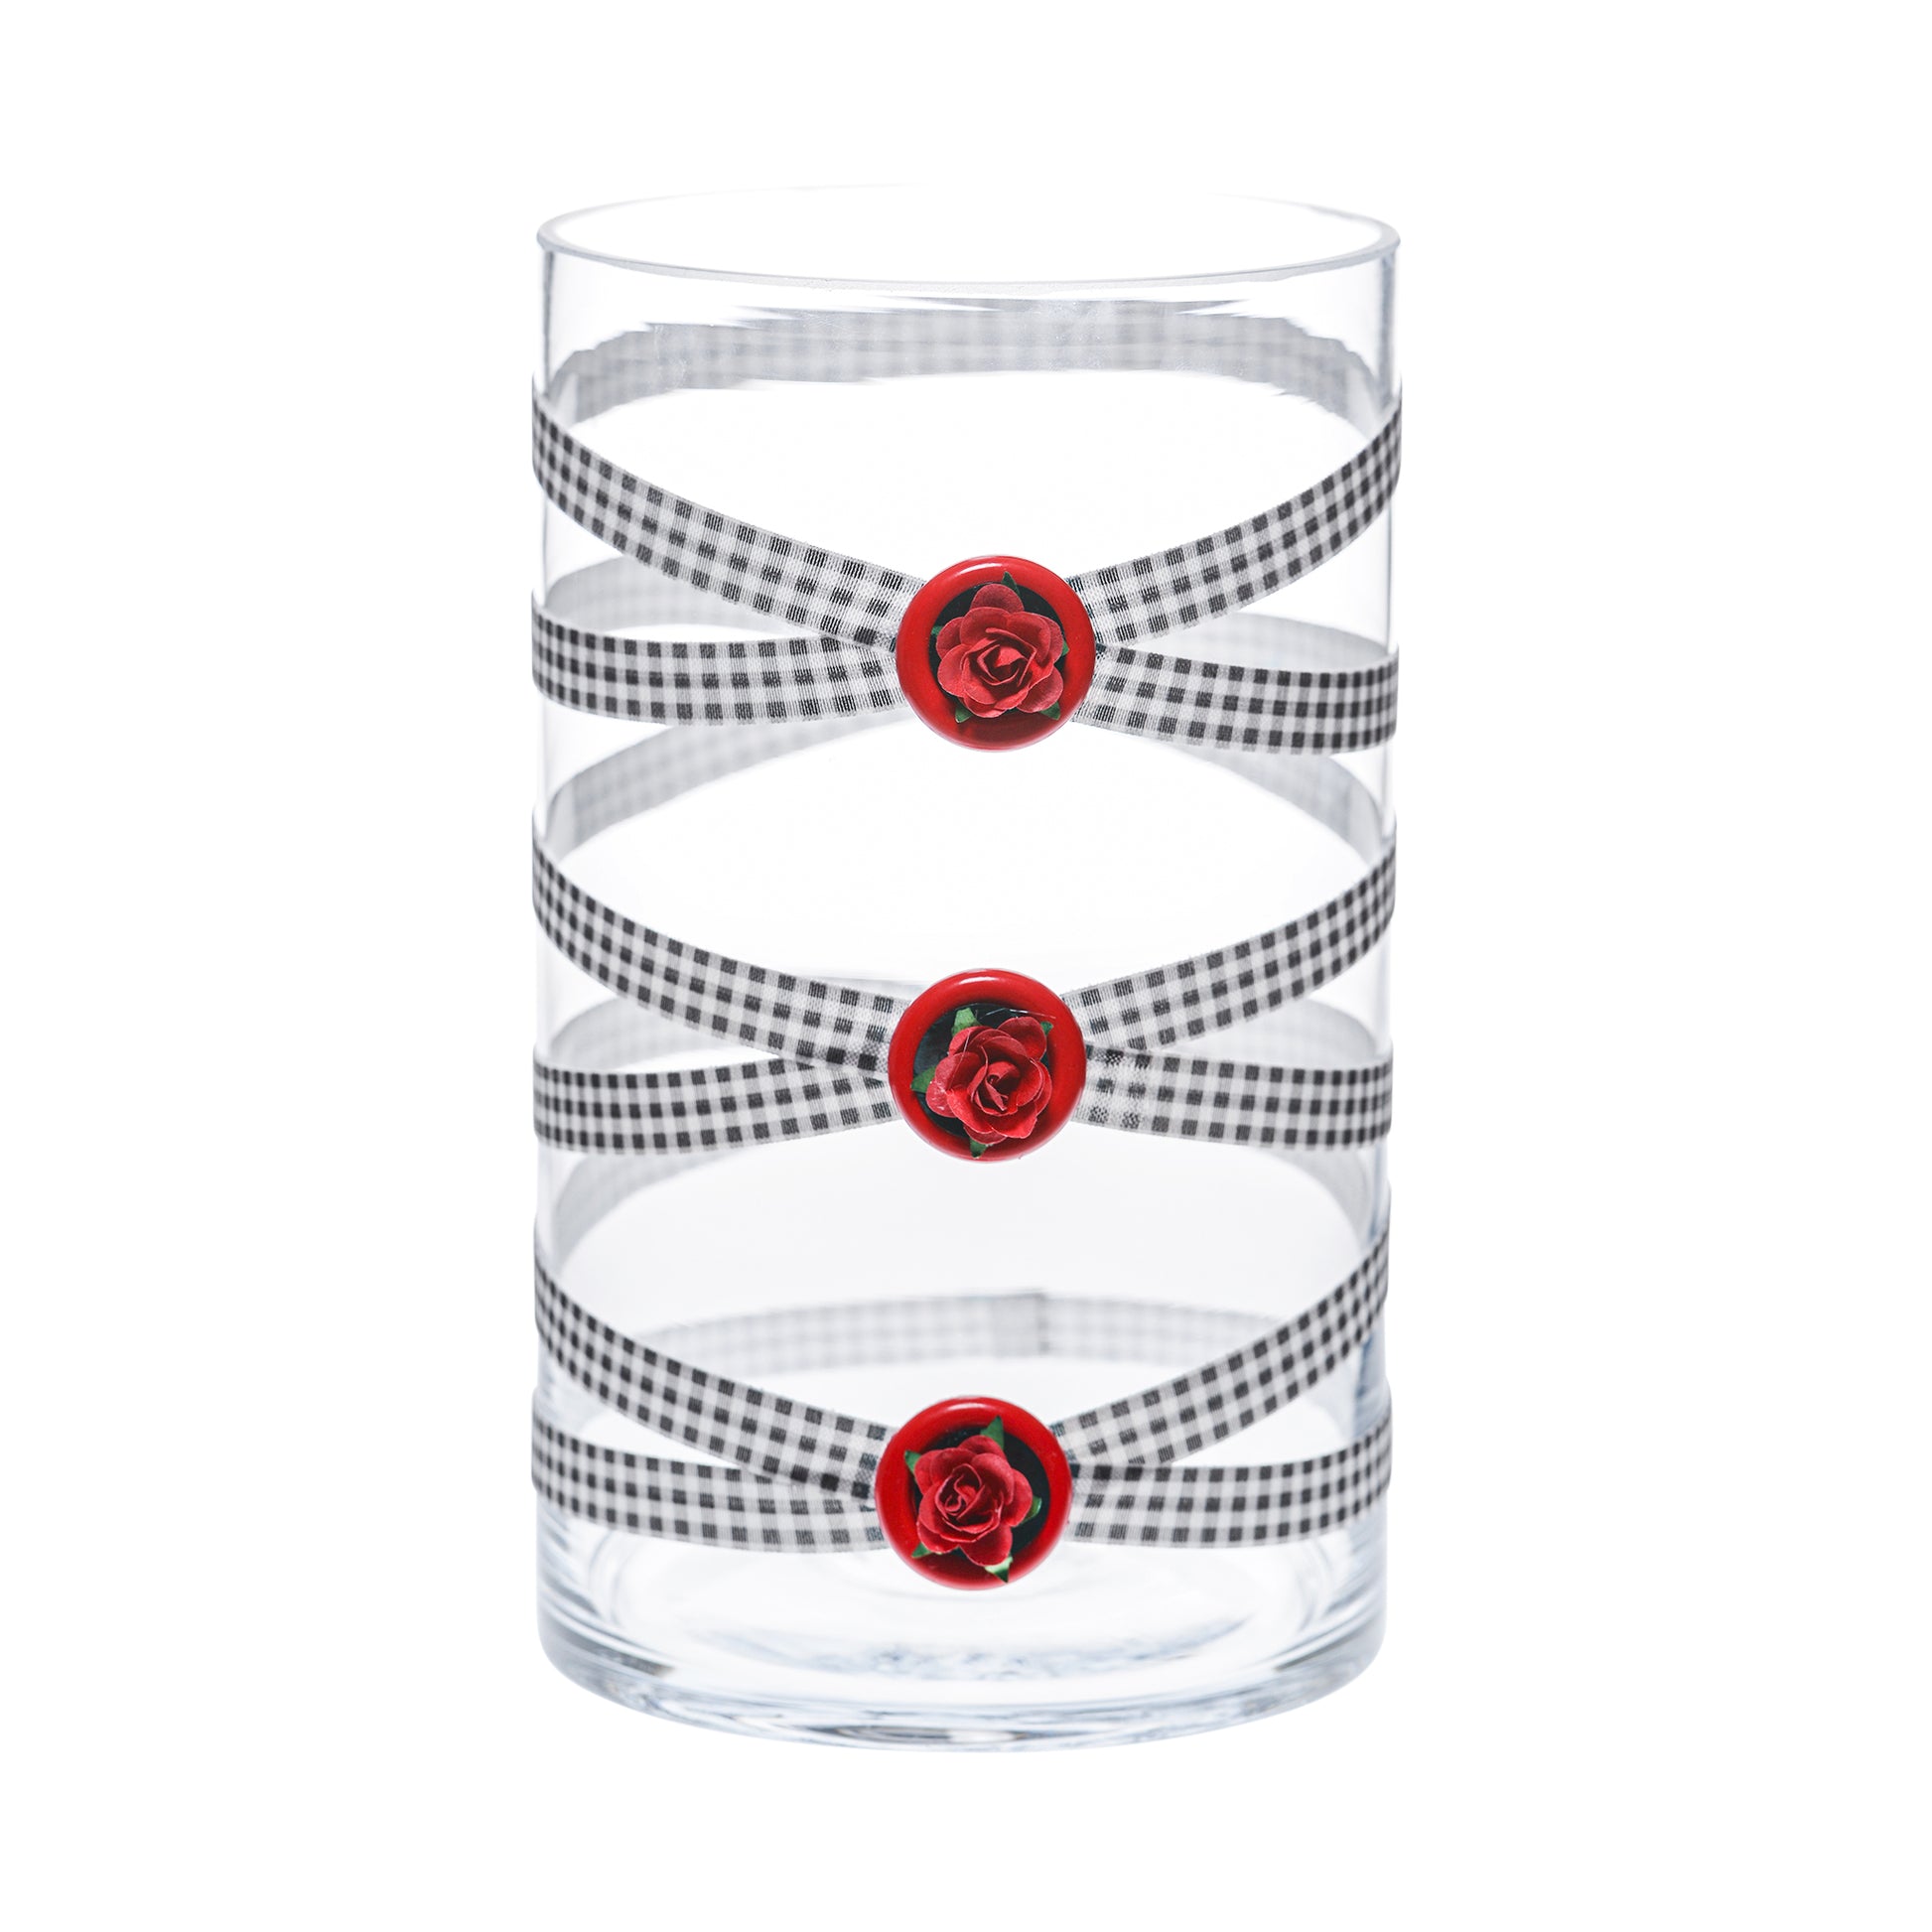 Front of Glass Wrappings 6" x 10" cylinder wrapped in black & white check elastic, decorated with 3 red roses.